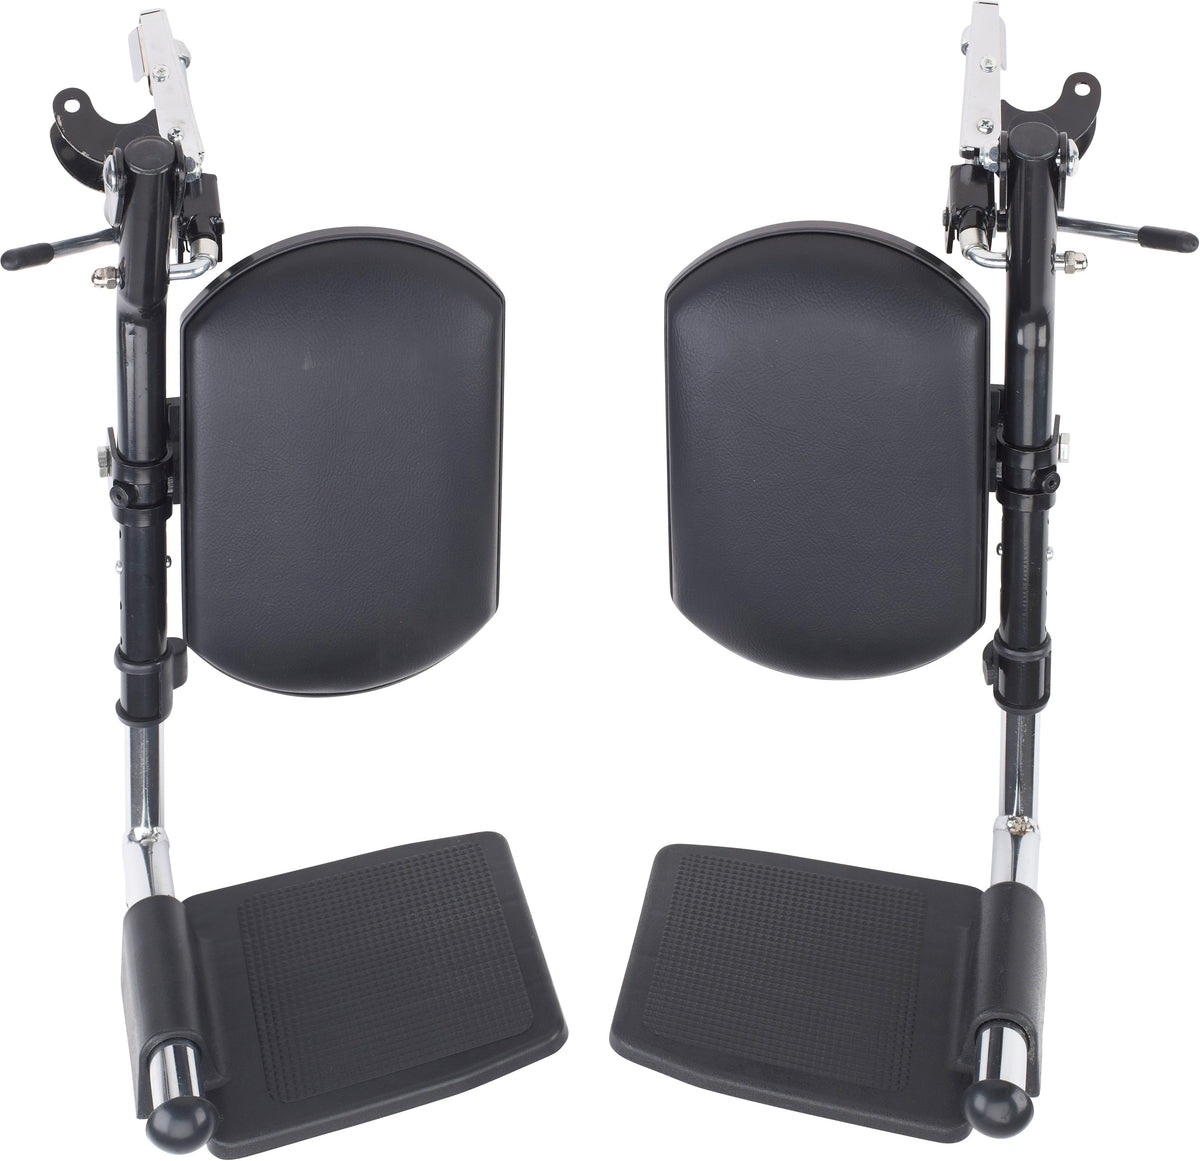 RESISTA Pilates Grip Sock Stand - Australian Physiotherapy Equipment